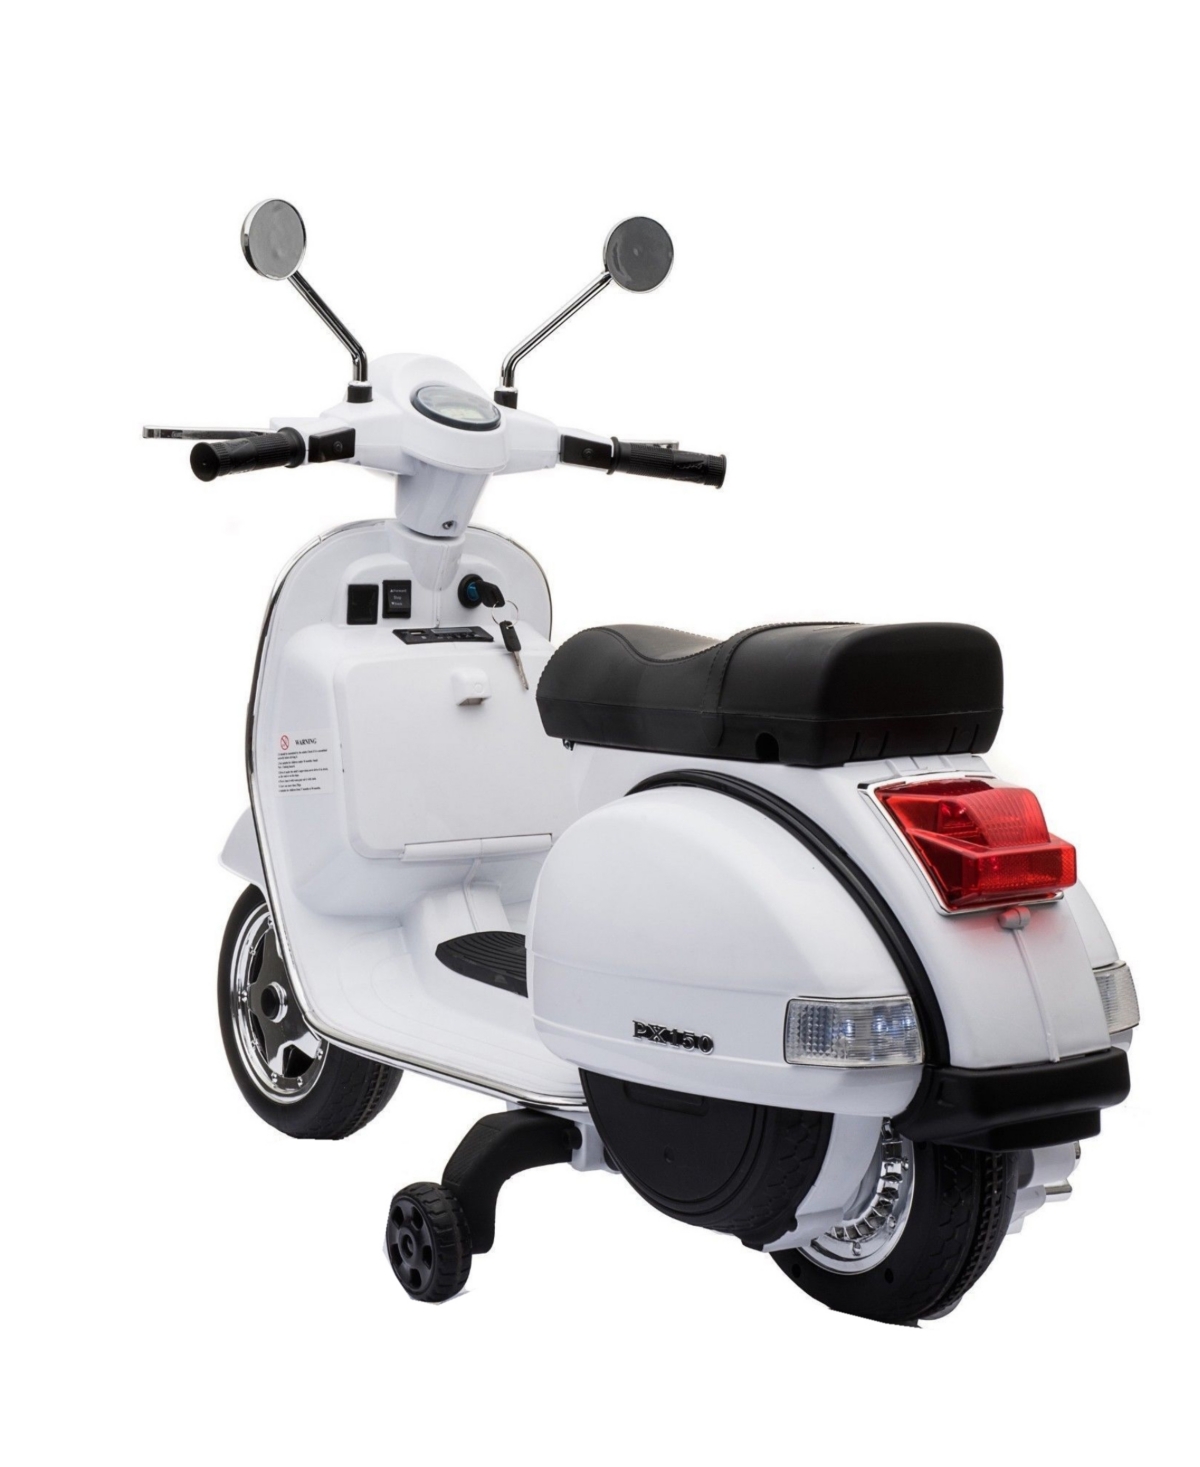 Shop Best Ride On Cars Vespa Scooter 12v Powered Ride-on In White